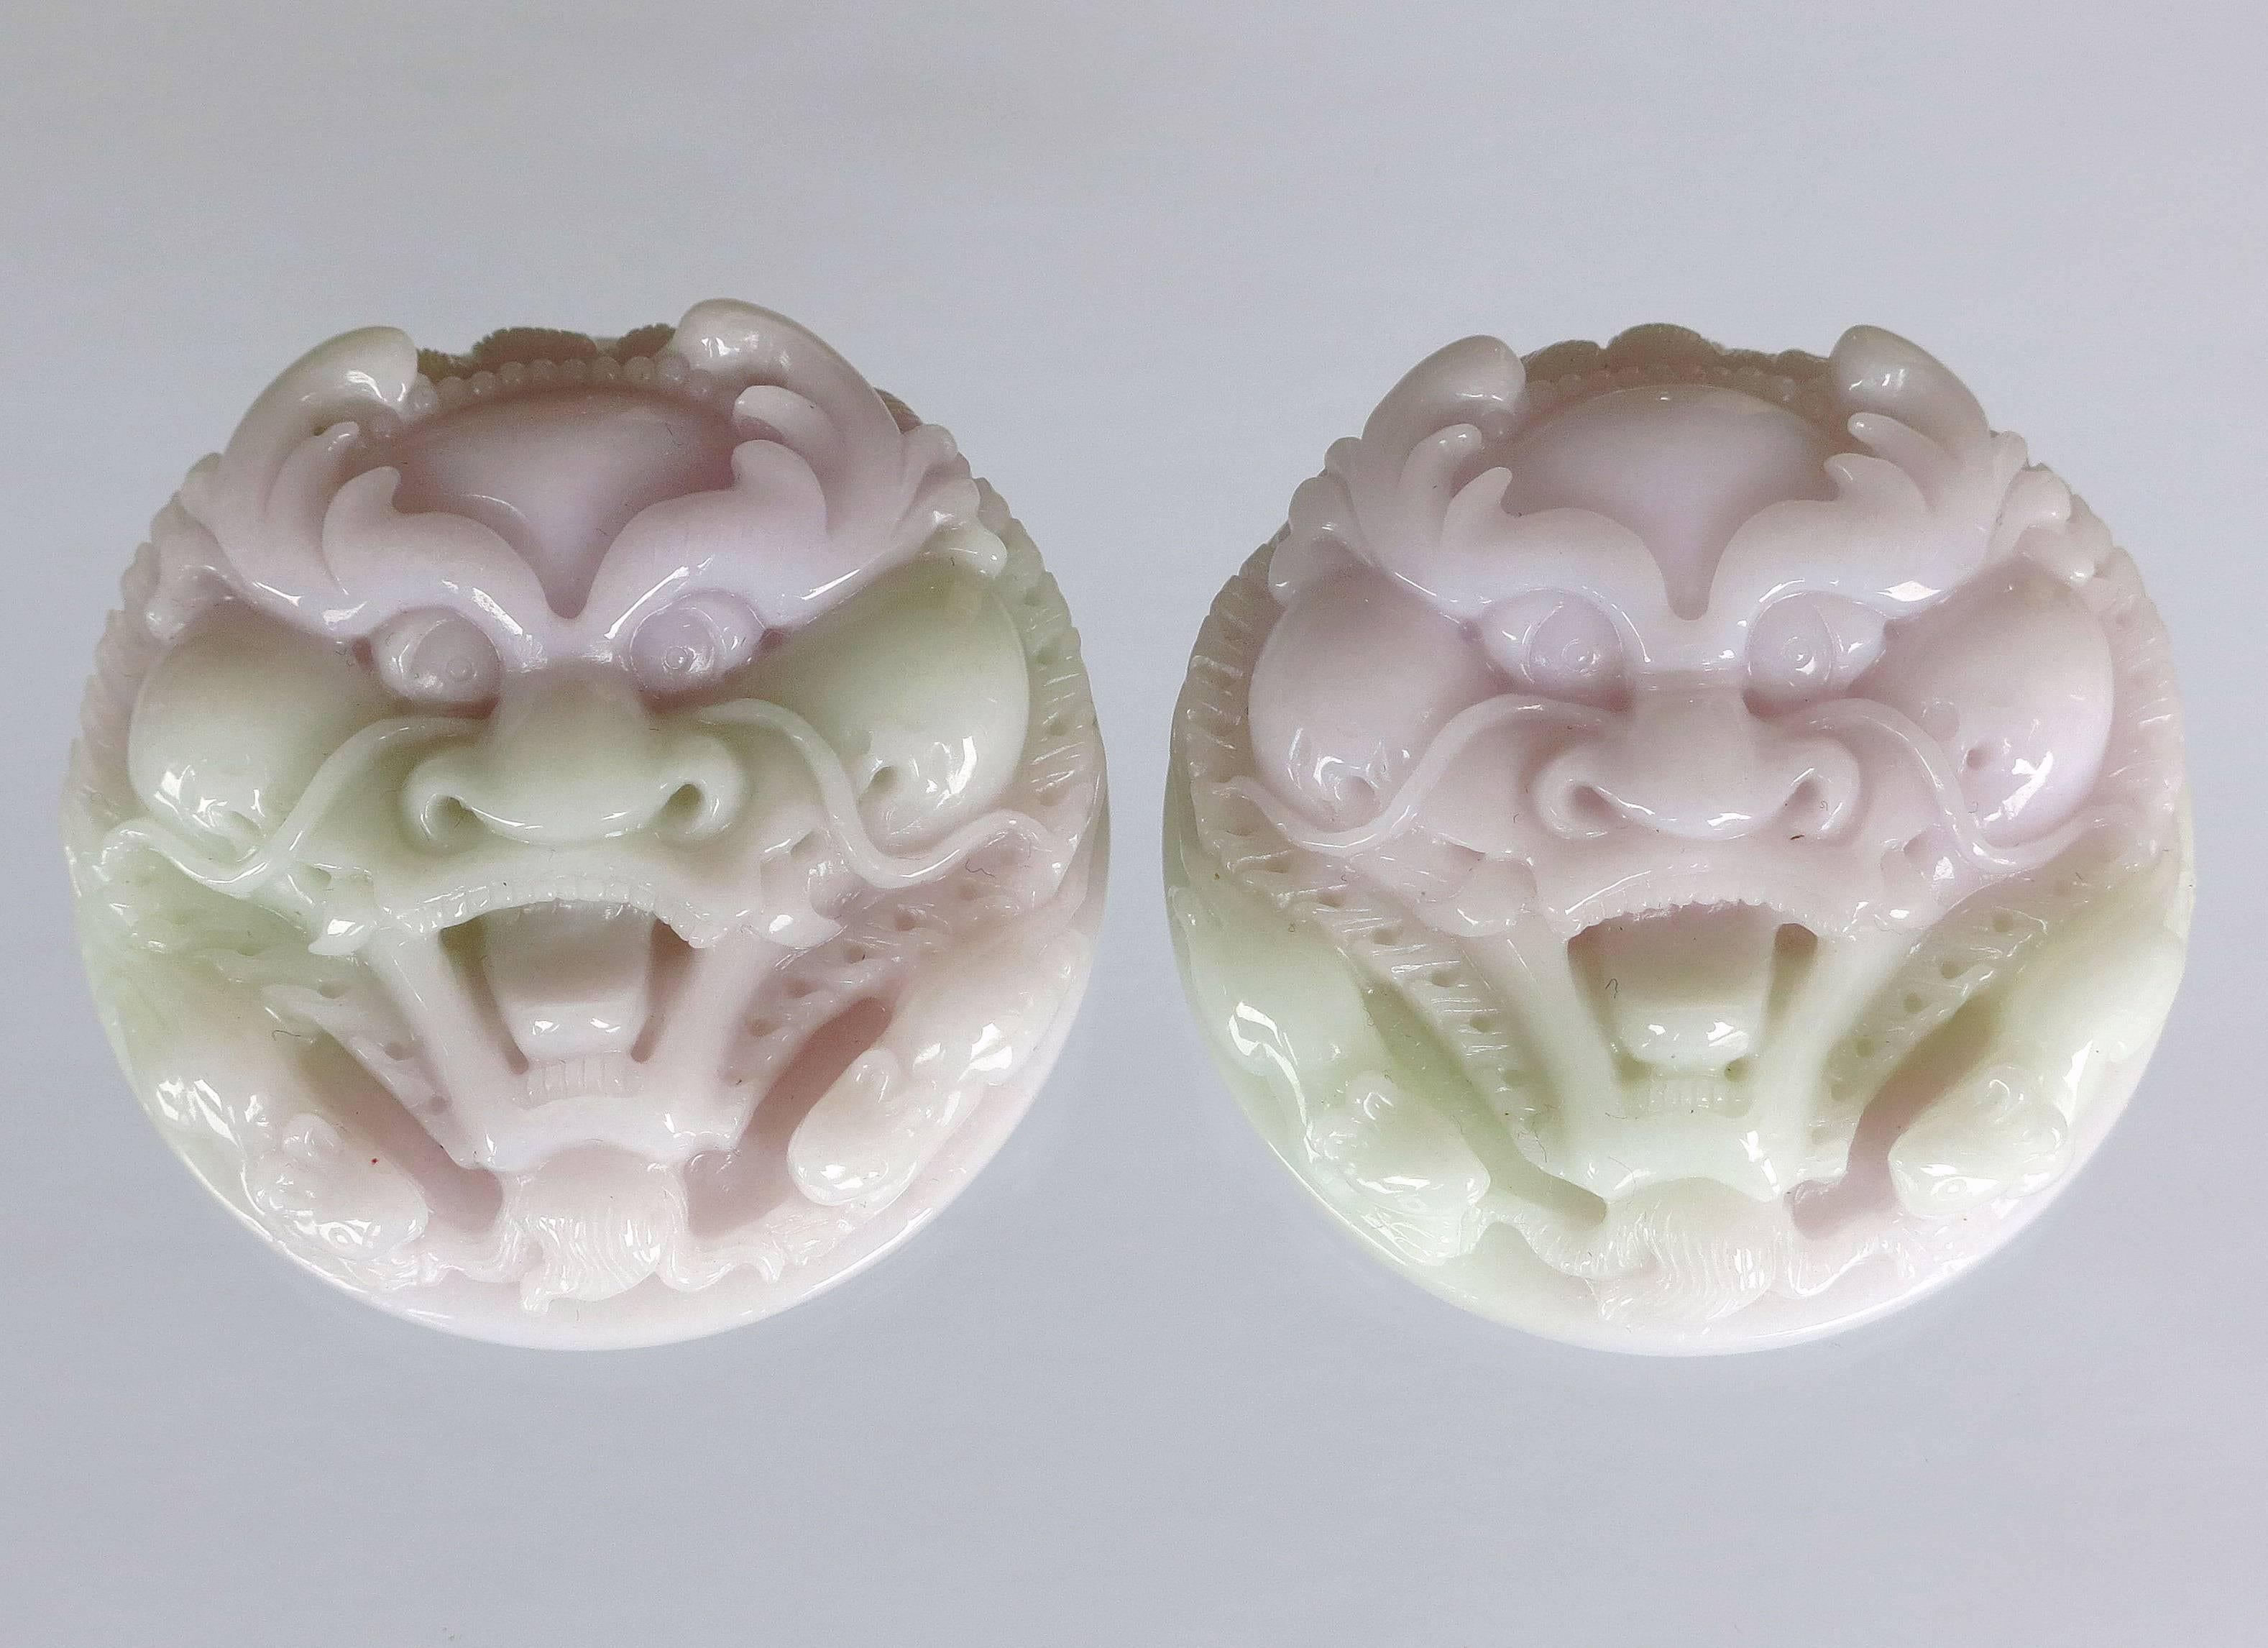 Beautiful pair of Hand Carved Jadeite Masks. Light lavender and very light mint-green. Each has a diameter of 56 mm. Average thickness is 20 mm. Total weight of the pair is 226 grams. Ideal for mounting in a Shadow Box Frame or set on top of a Box.